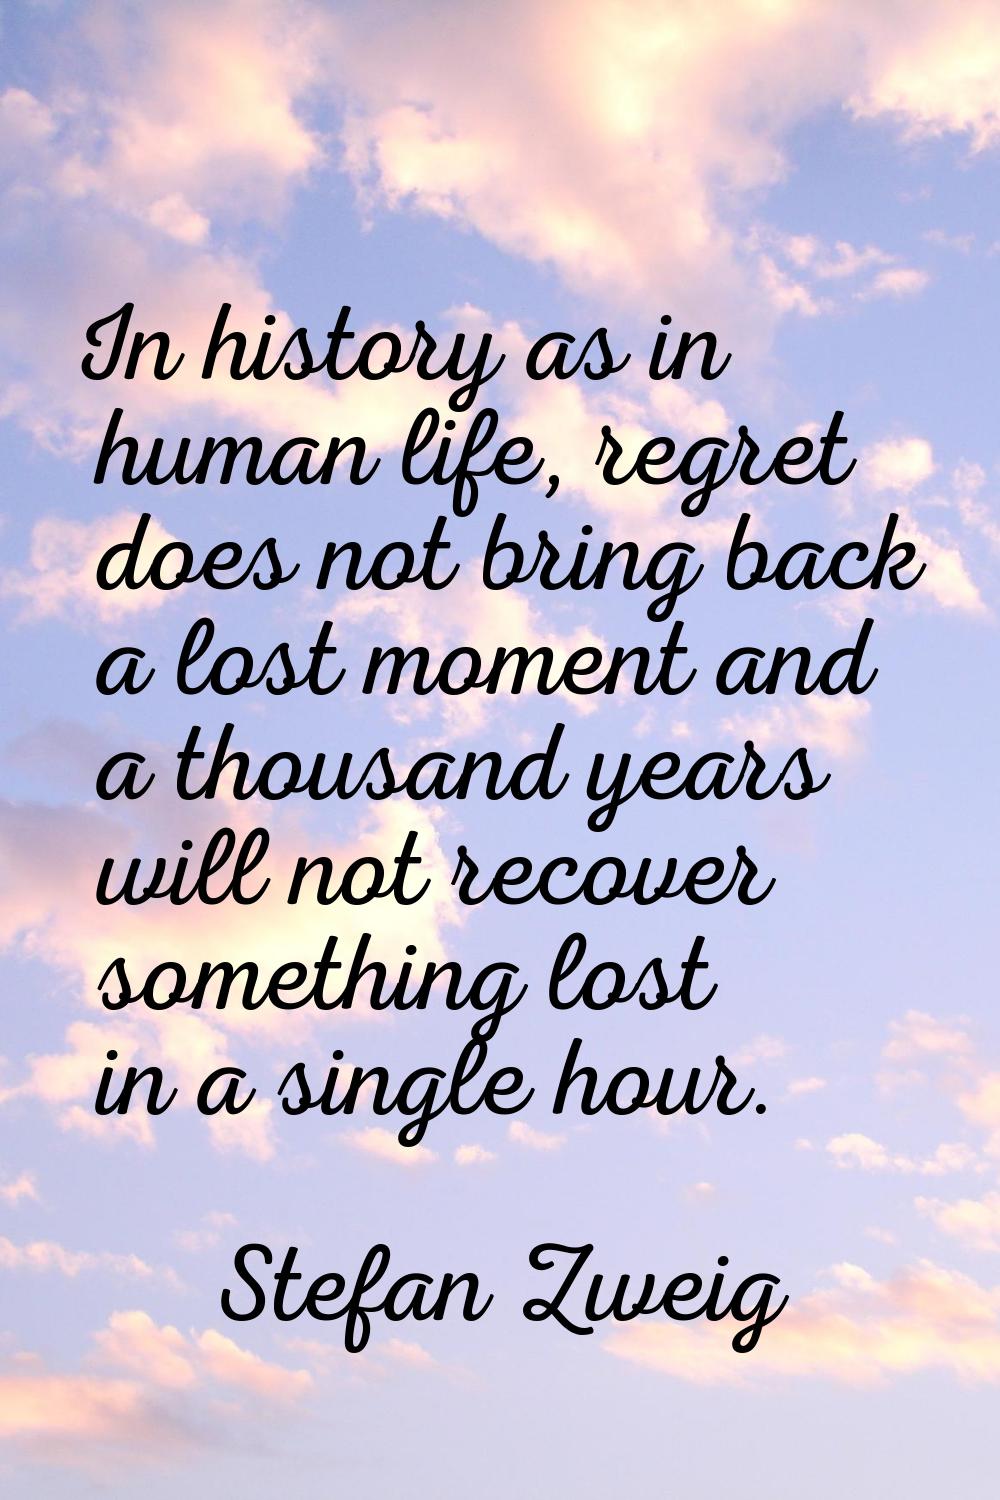 In history as in human life, regret does not bring back a lost moment and a thousand years will not